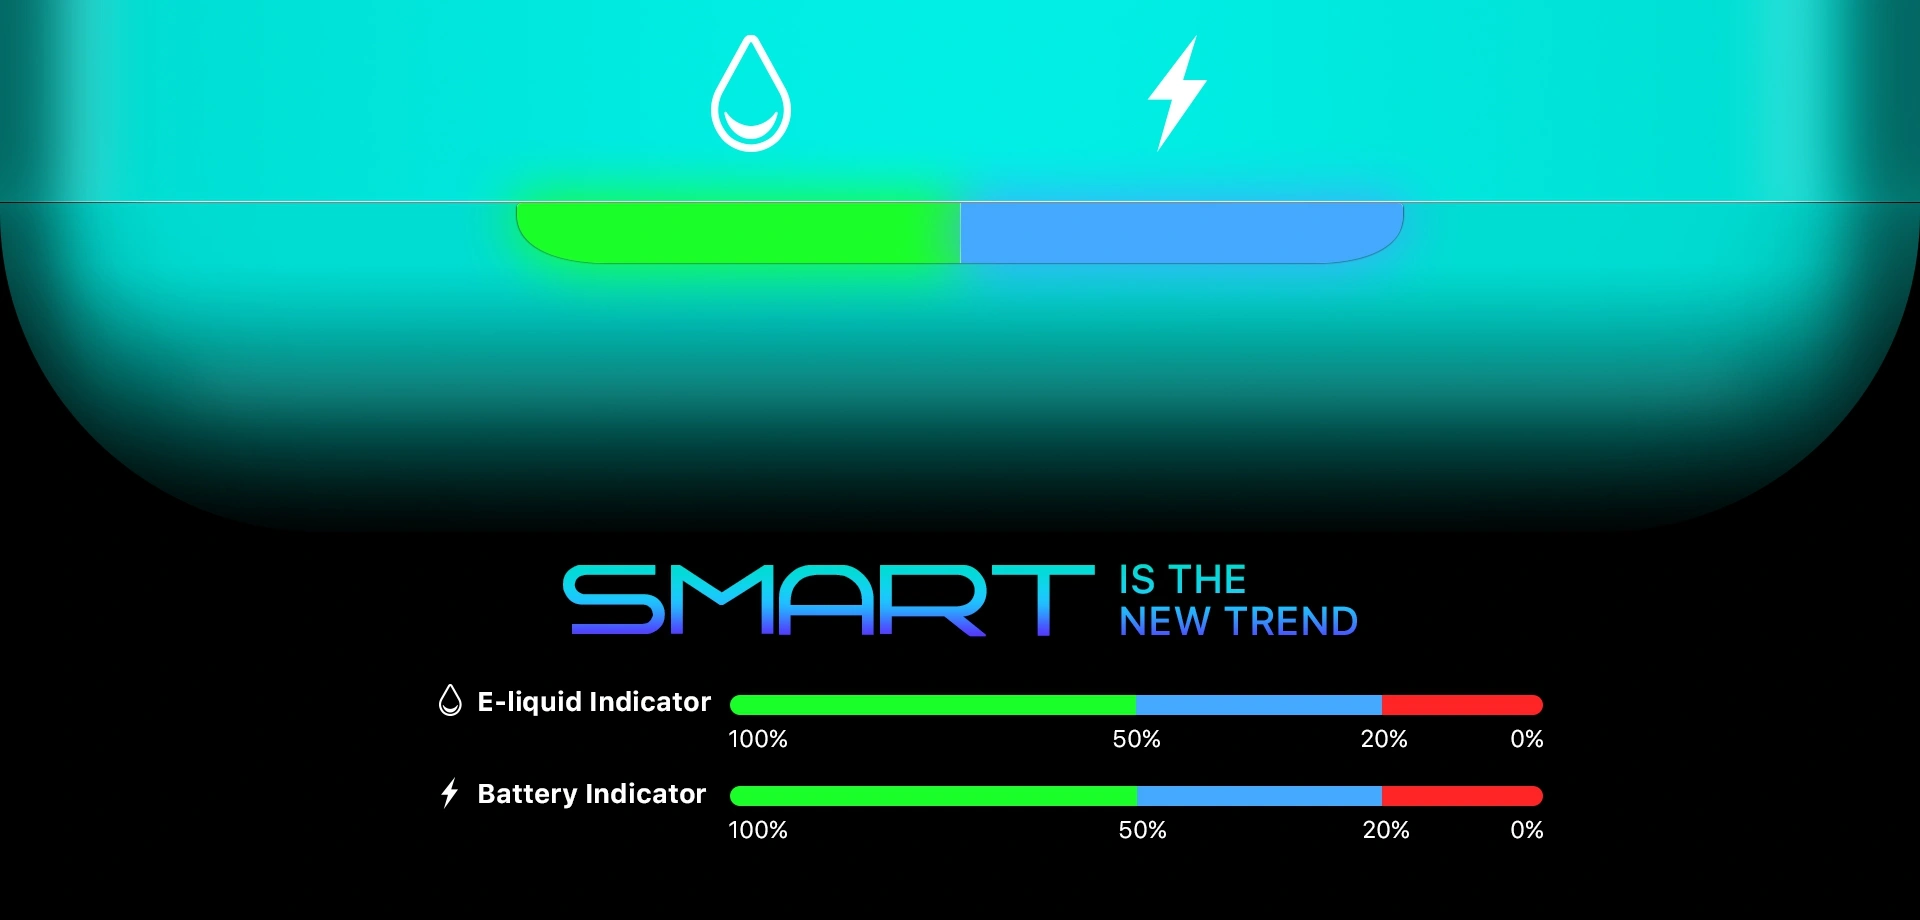 Real-time e-liquid and battery indicators